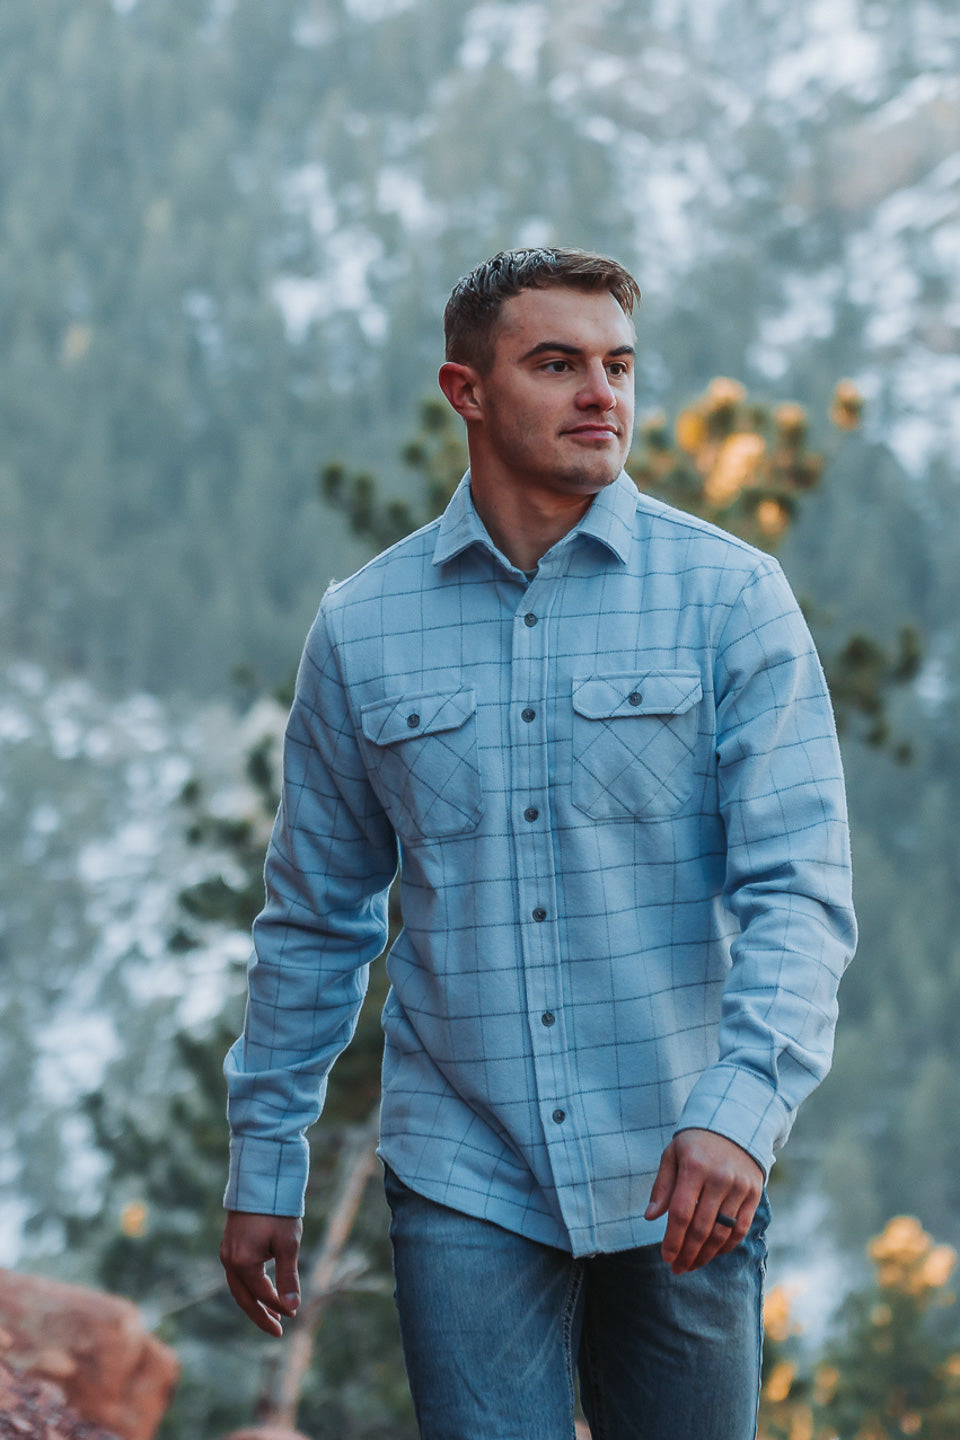 Heavywelght Flannel Shirt for Men by Muskox Flannels, Thick 100% Cotton Flannel Shirt in Dust Blue